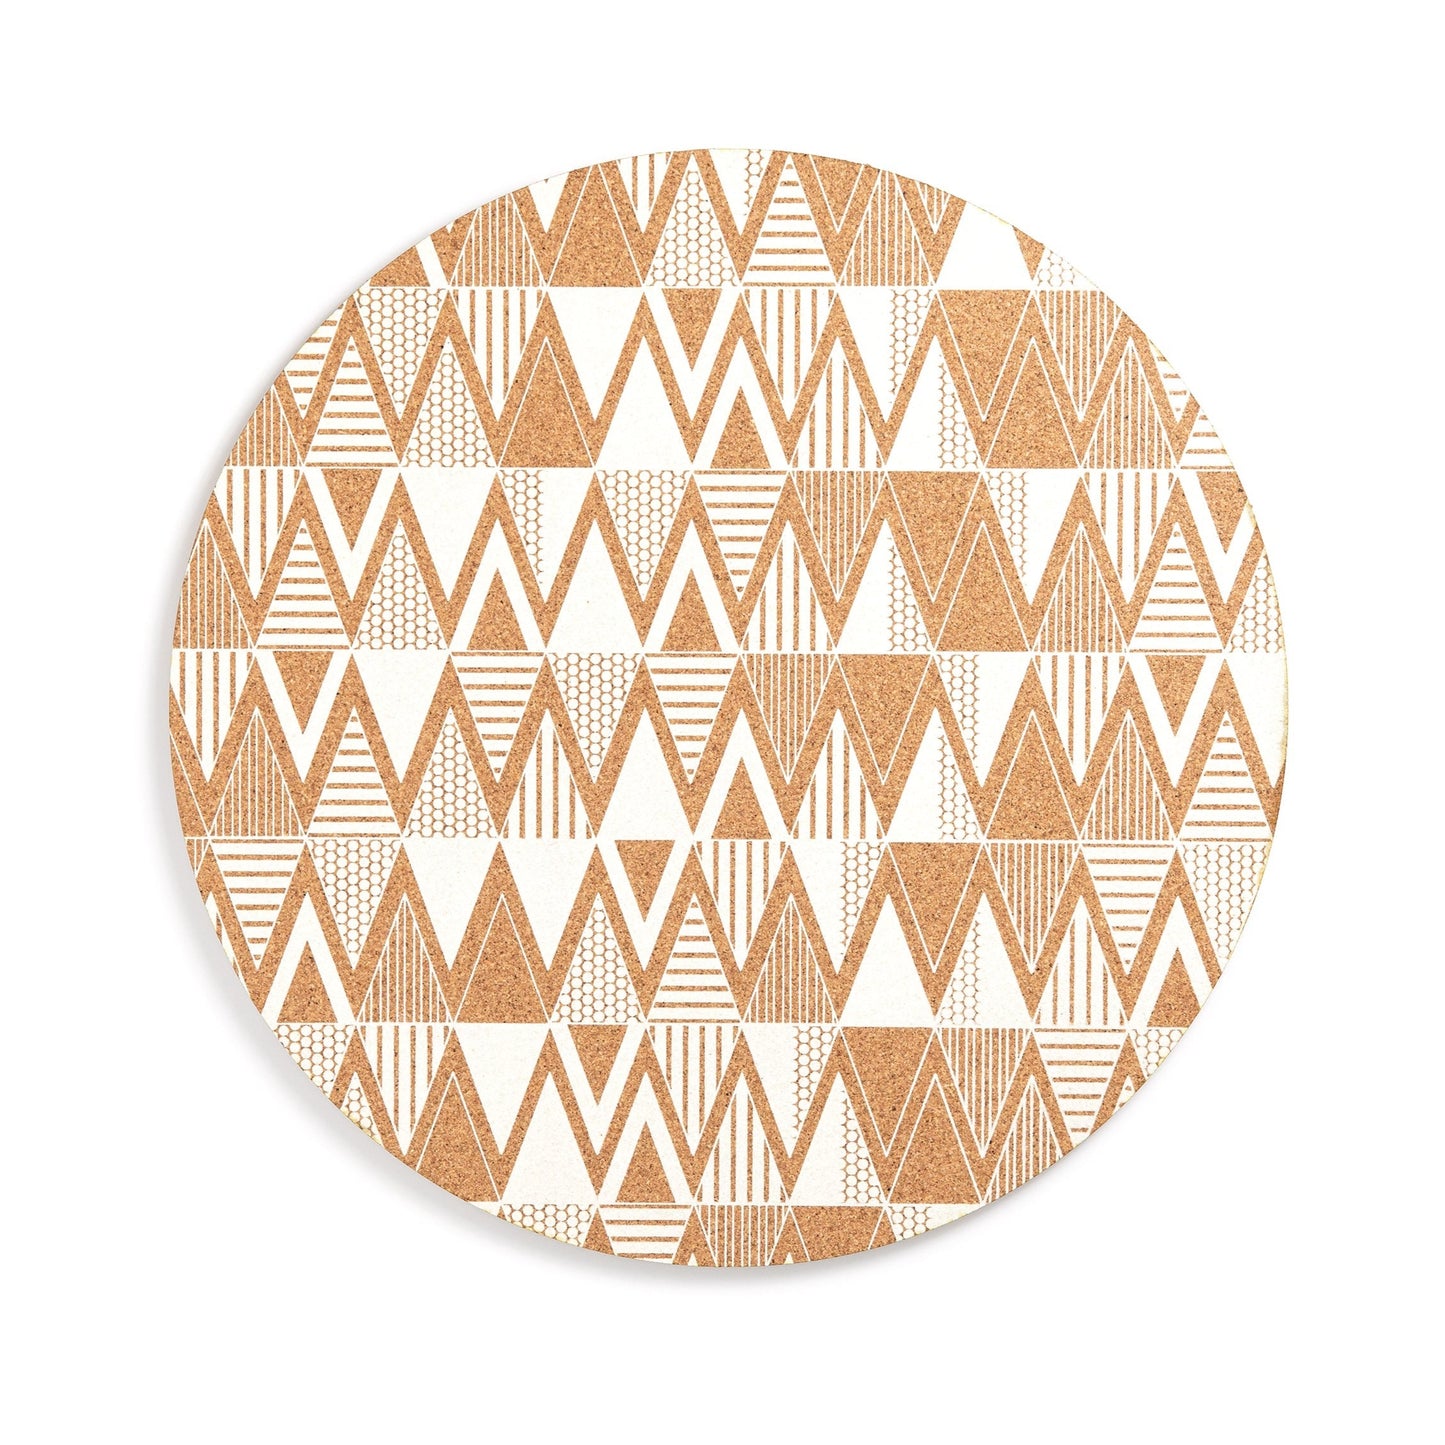 A geometric surface pattern design in white is screen printed onto cork to create a colourful and stylish placemat for dining.